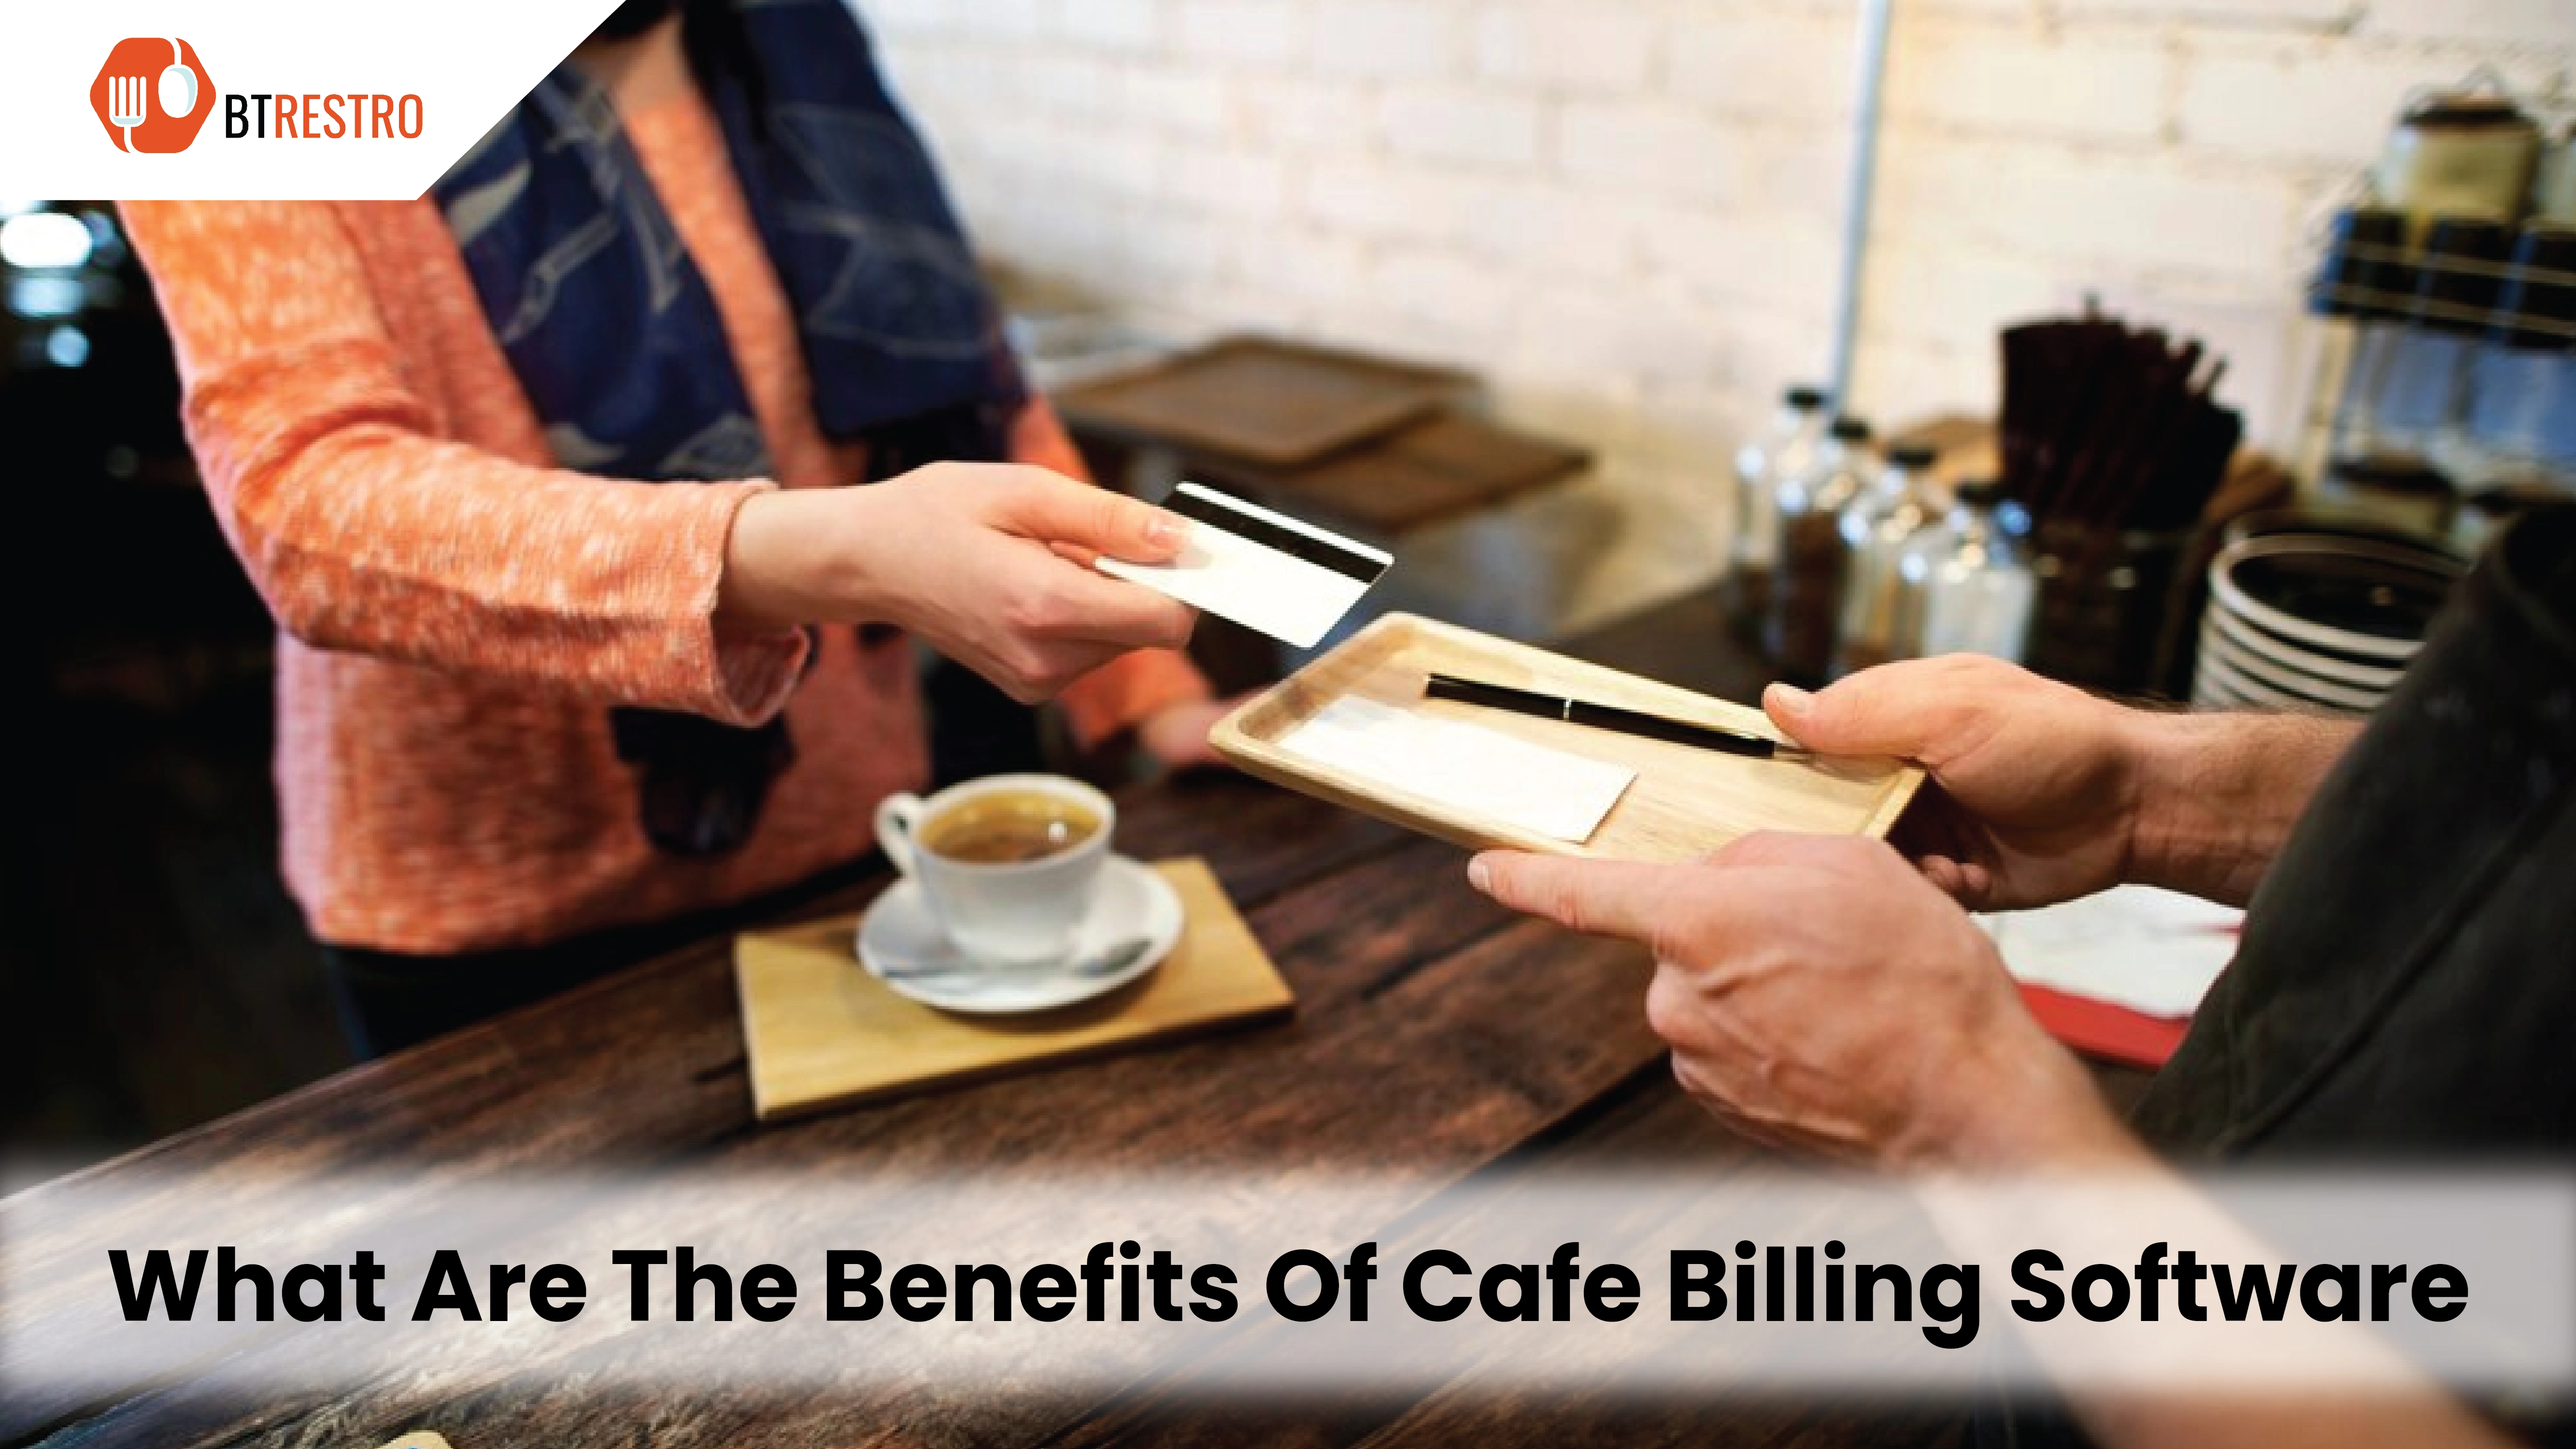 What Are The Benefits Of Cafe Billing Software?